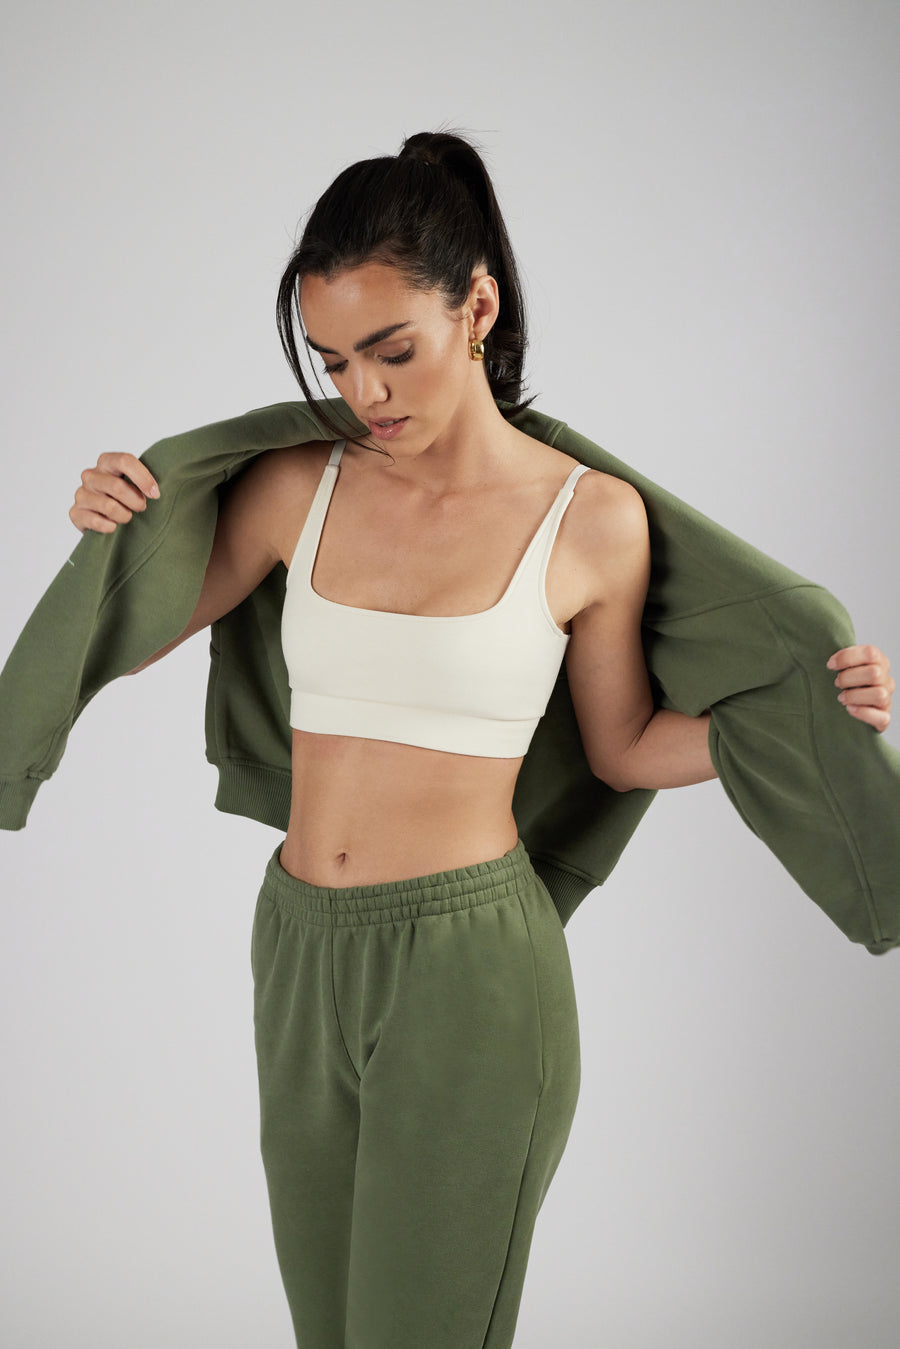 Woman wearing unisex sweatpants and crop top in color sage green